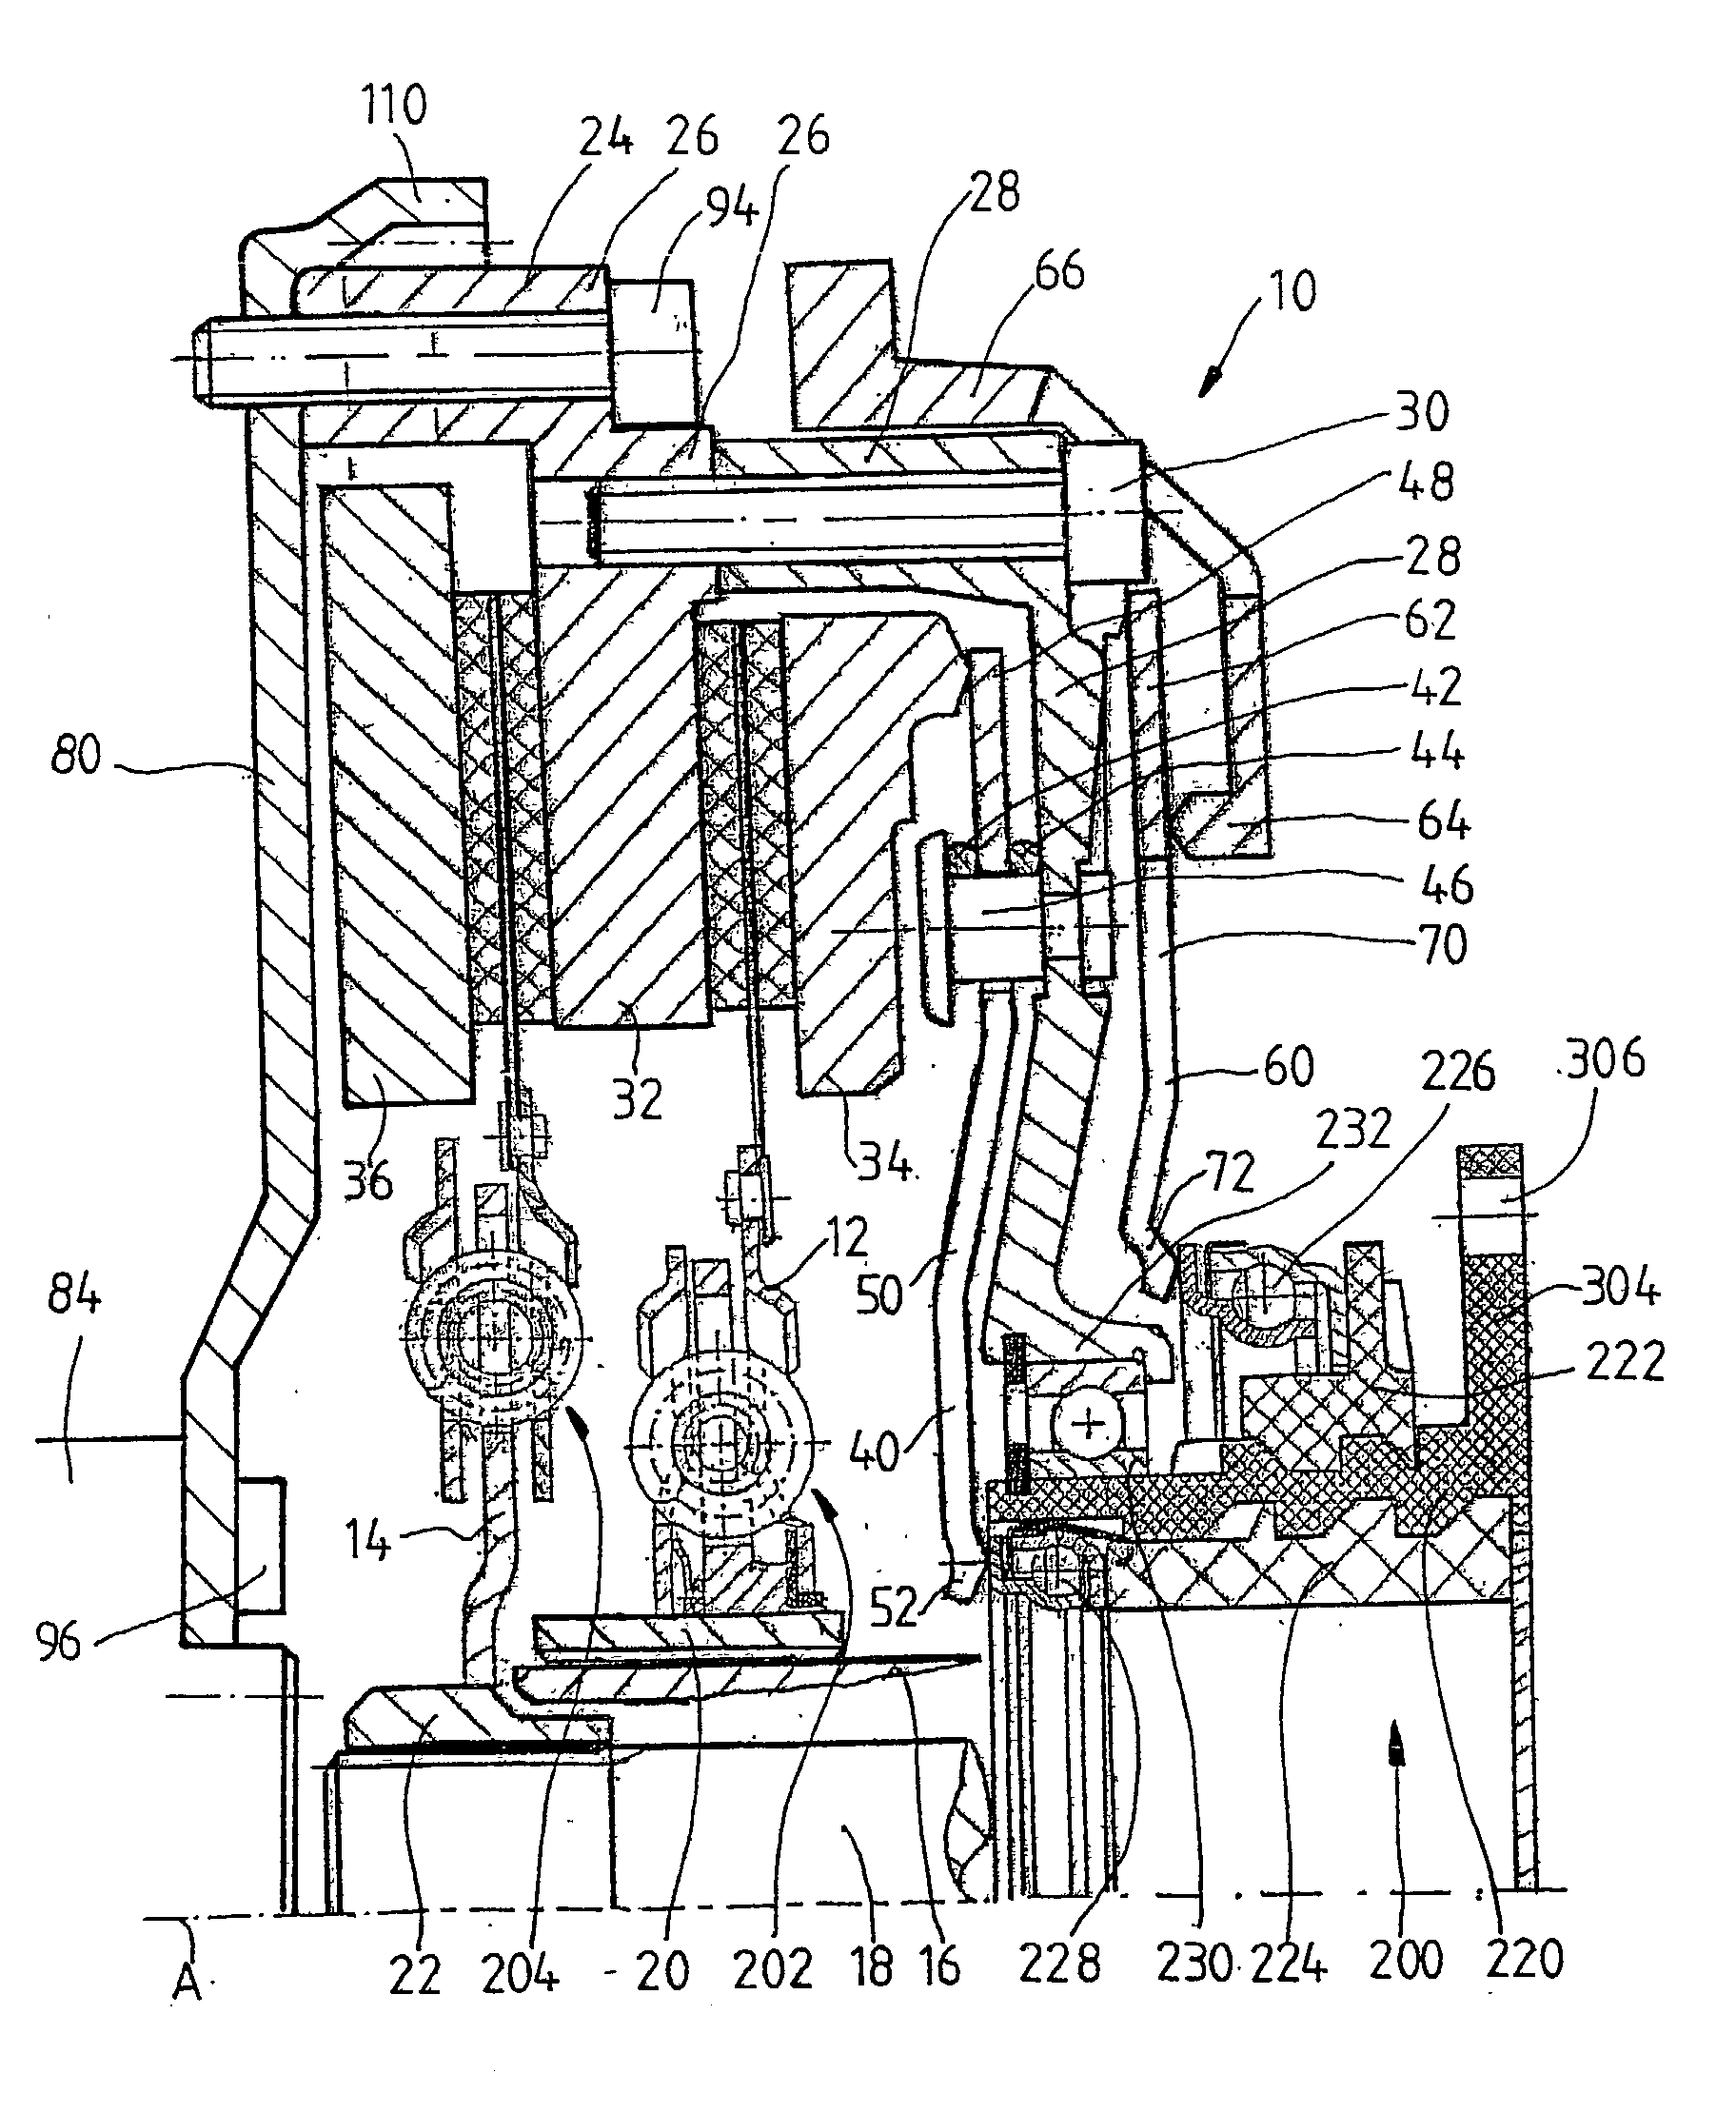 Actuating device for a friction clutch device, possibly a dual or multiple friction clutch device